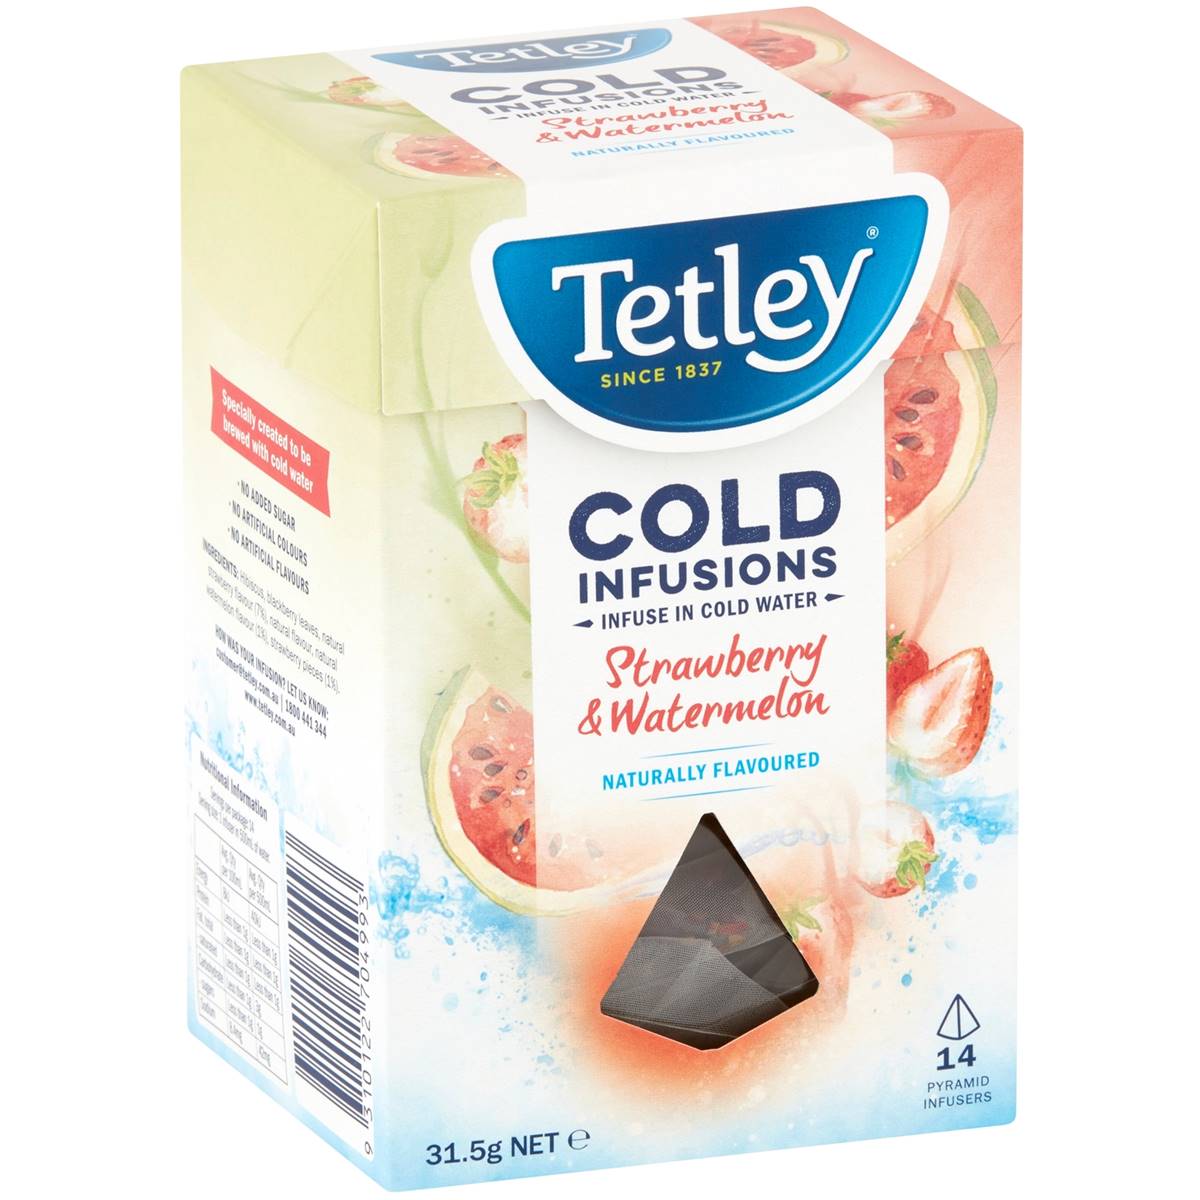 Calories in Tetley Cold Infusions Strawberry & Watermelon